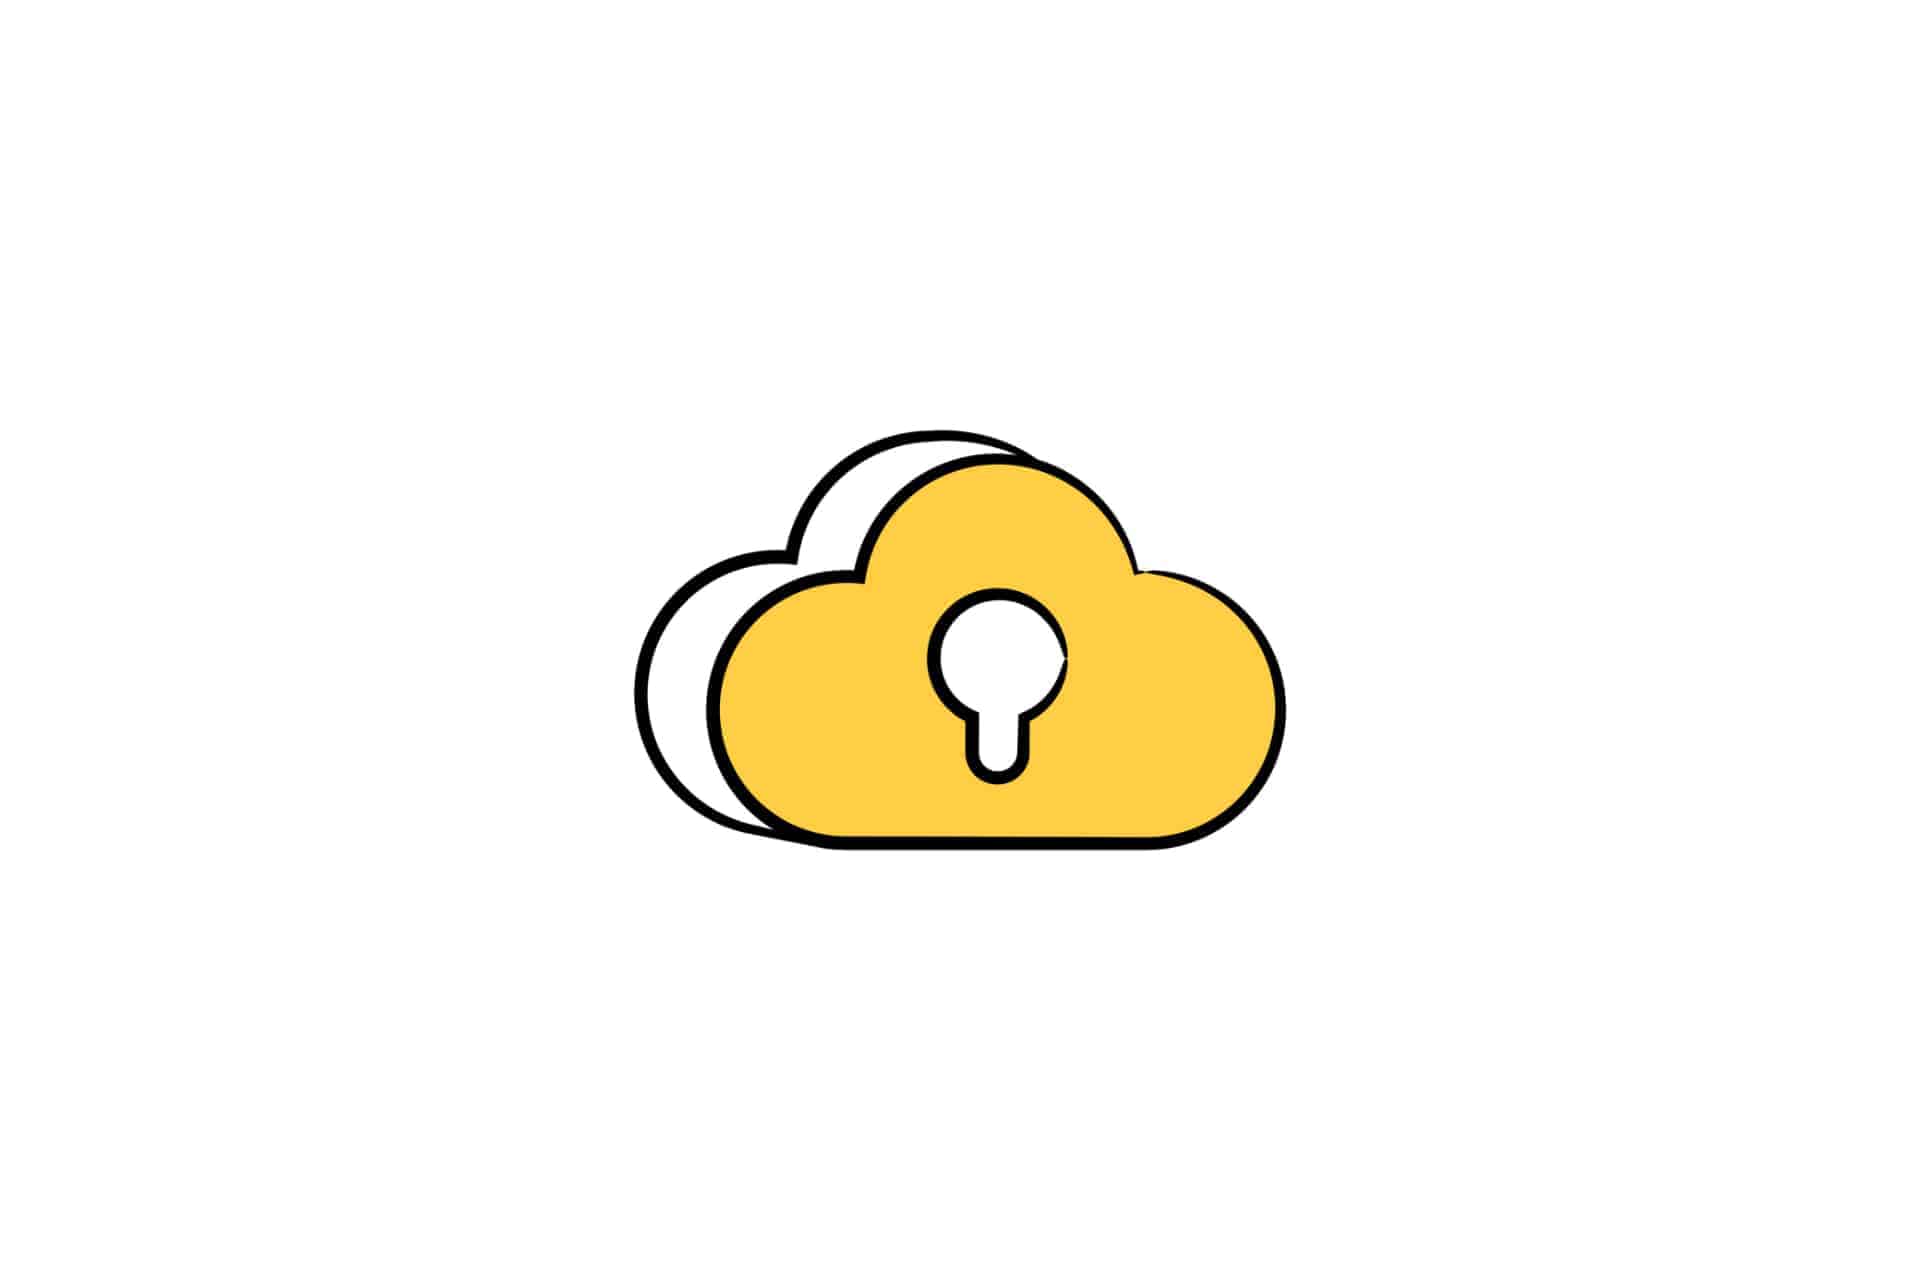 Cloud illustration with a key hole in the middle.